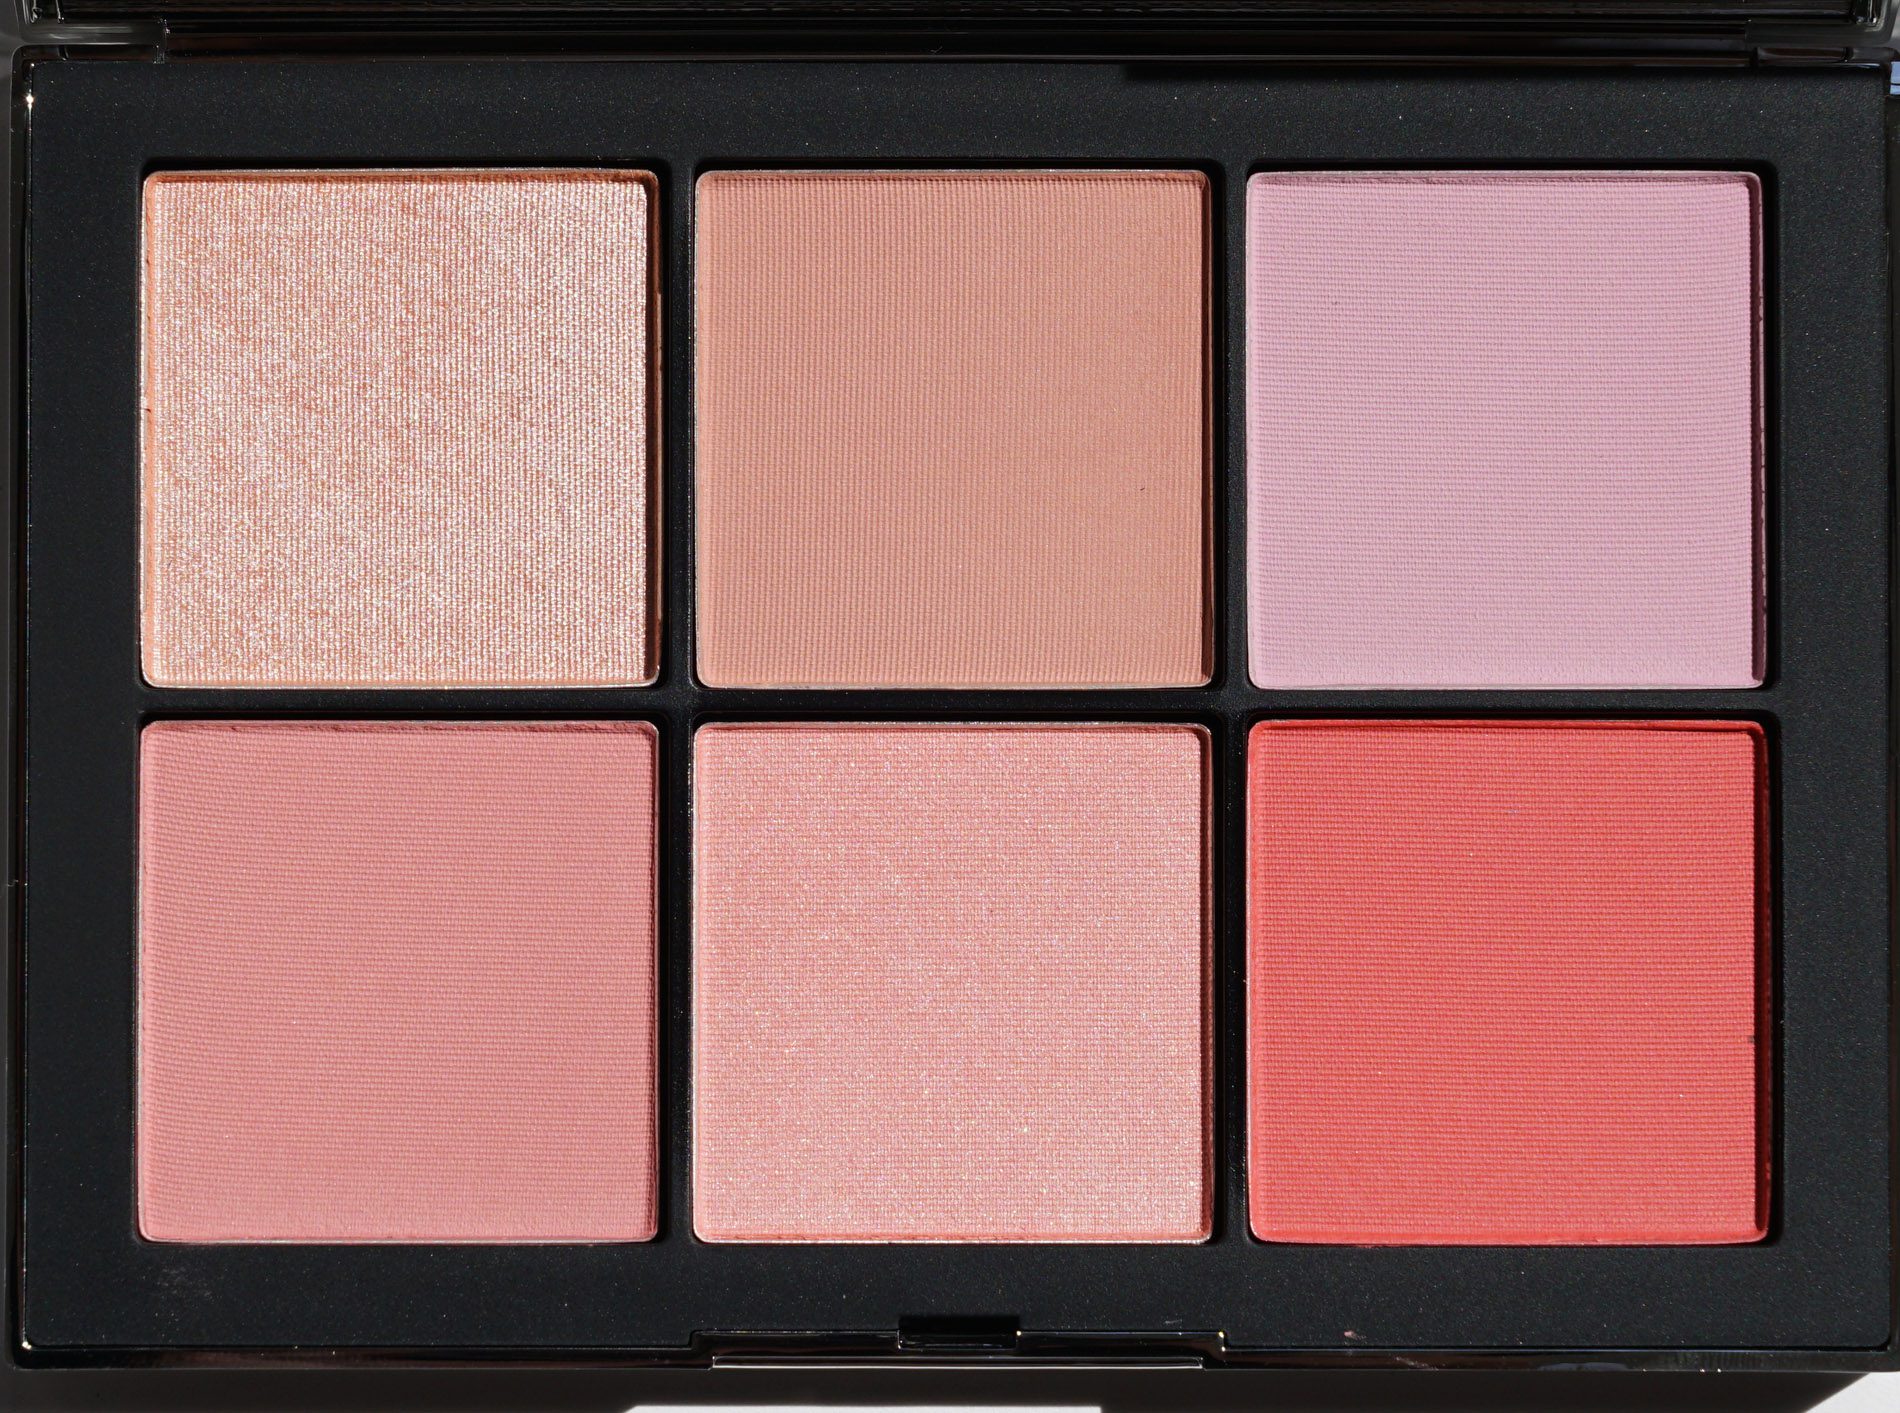 NARS Narsissist Wanted Cheek Palettes and Power Pack Duos - The 